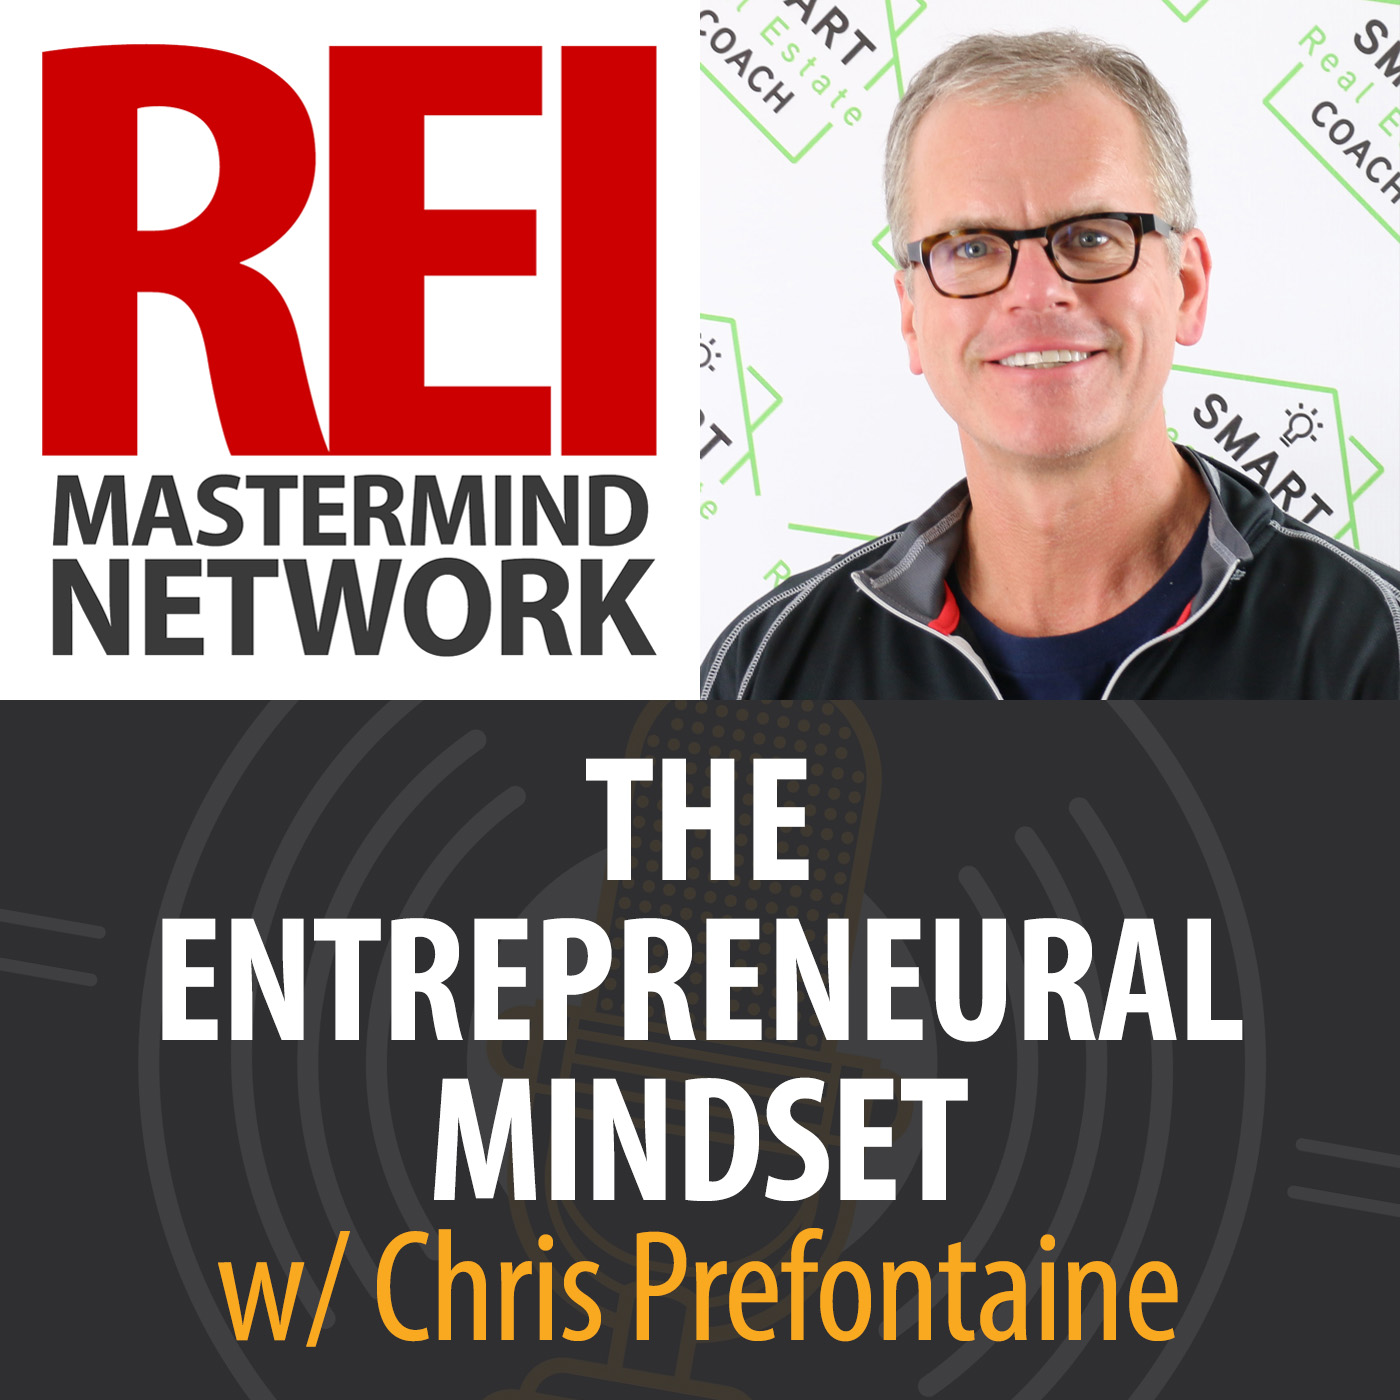 The Entrepreneurial Mindset with Chris Prefontaine